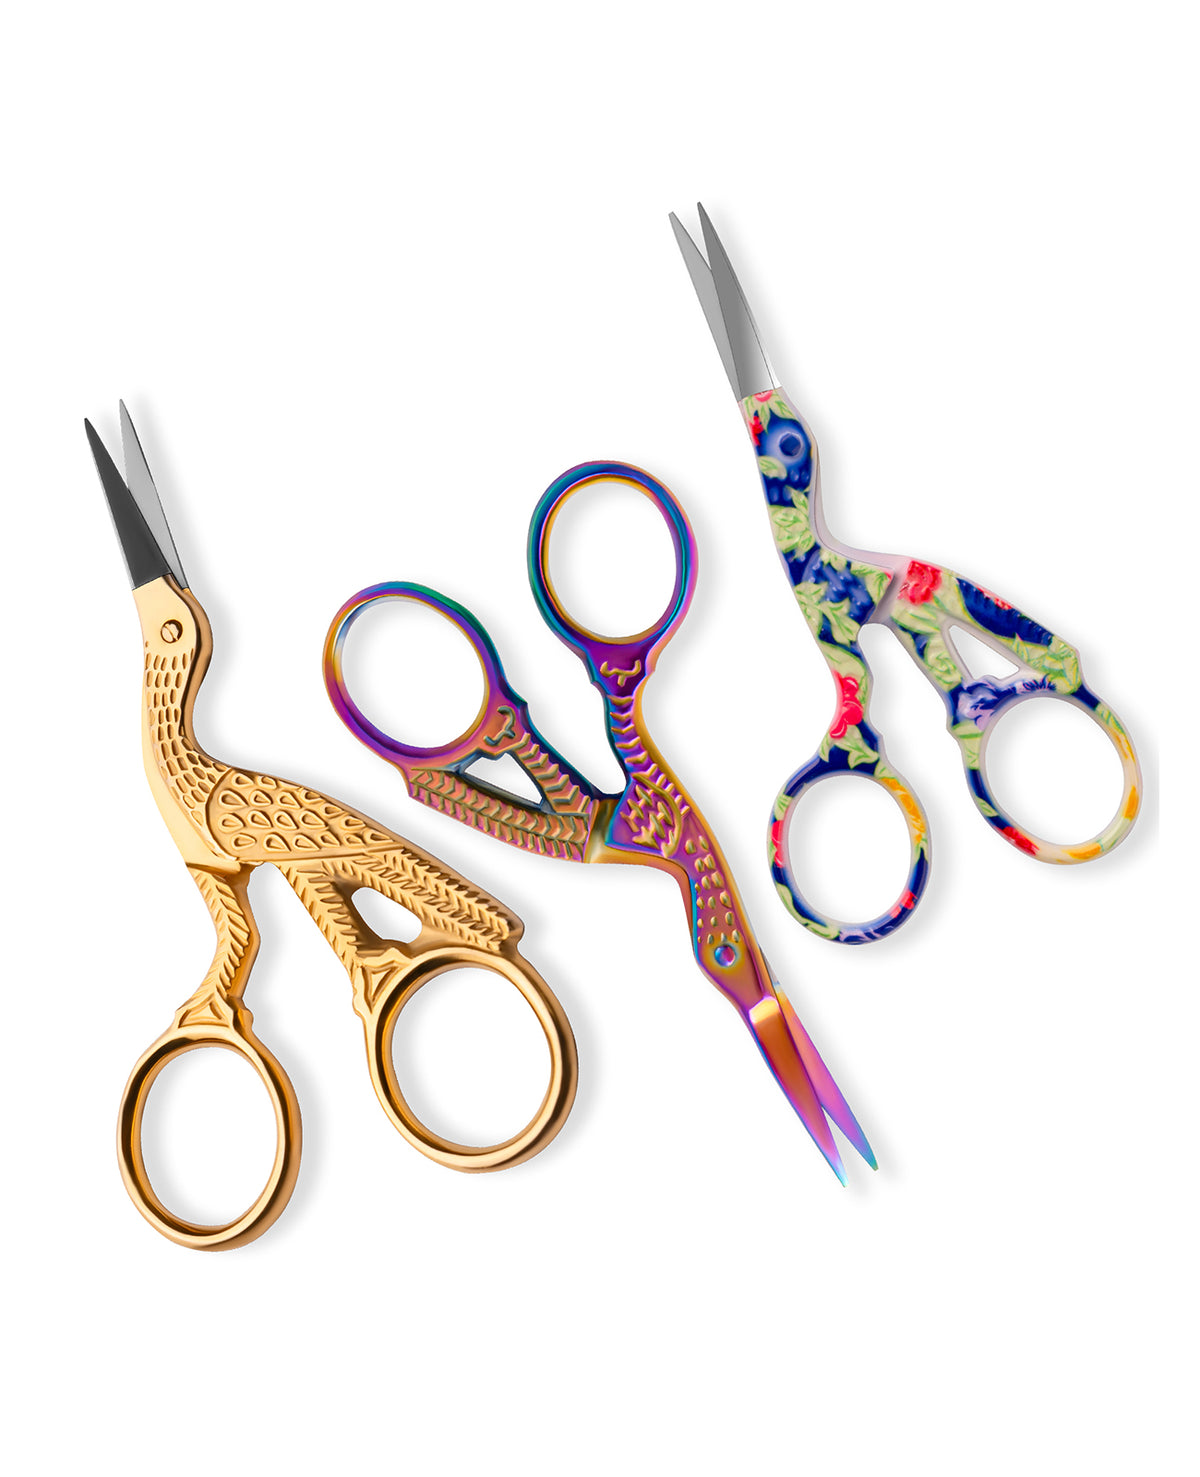 Embroidery scissor gold, rainbow, paper coated